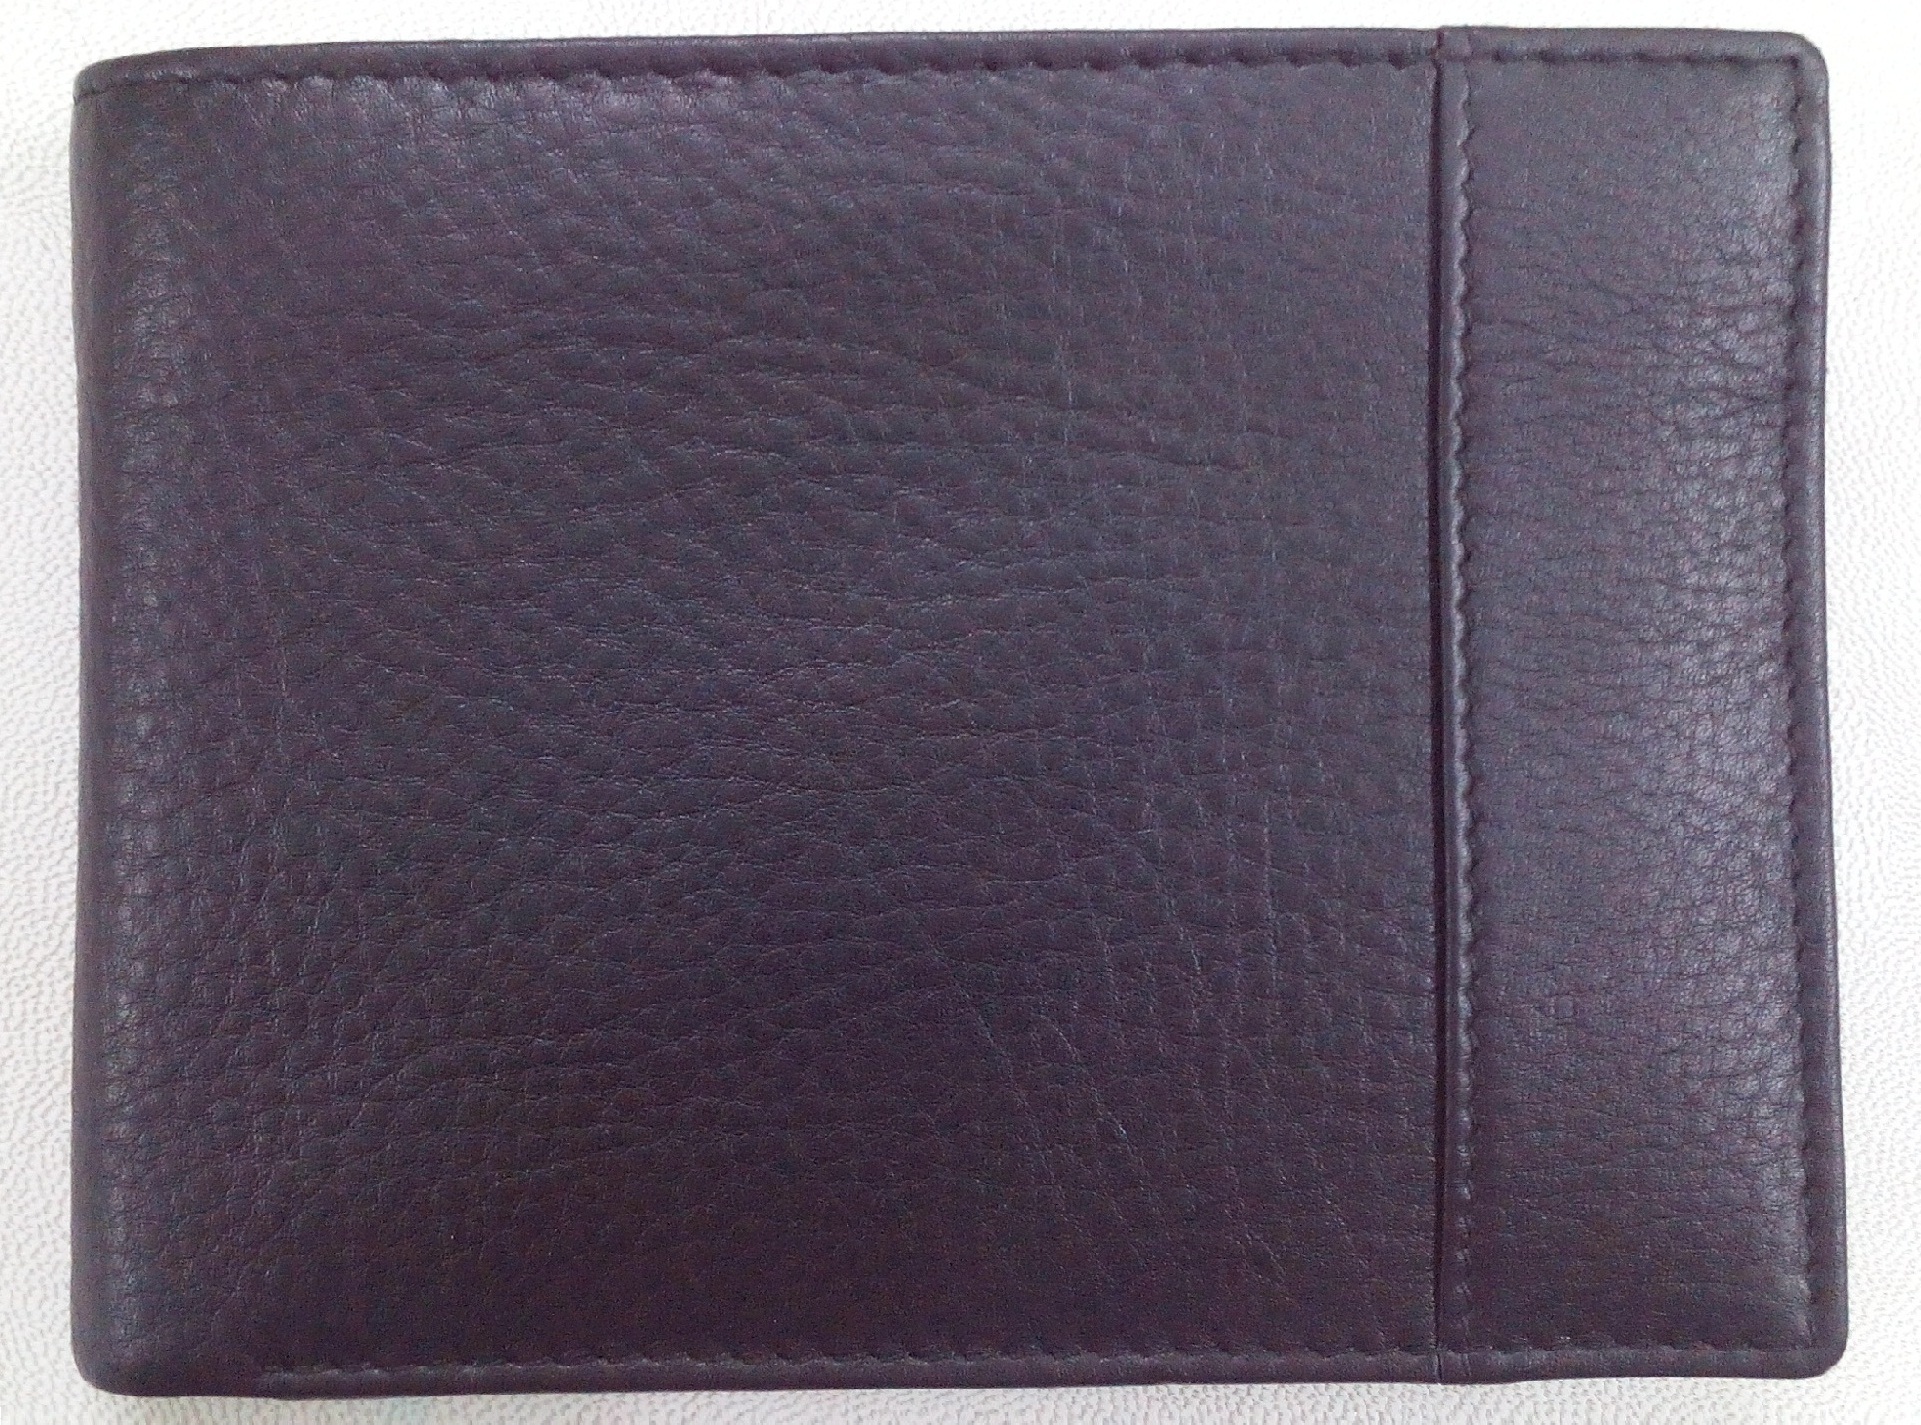 Express Leather Wallet